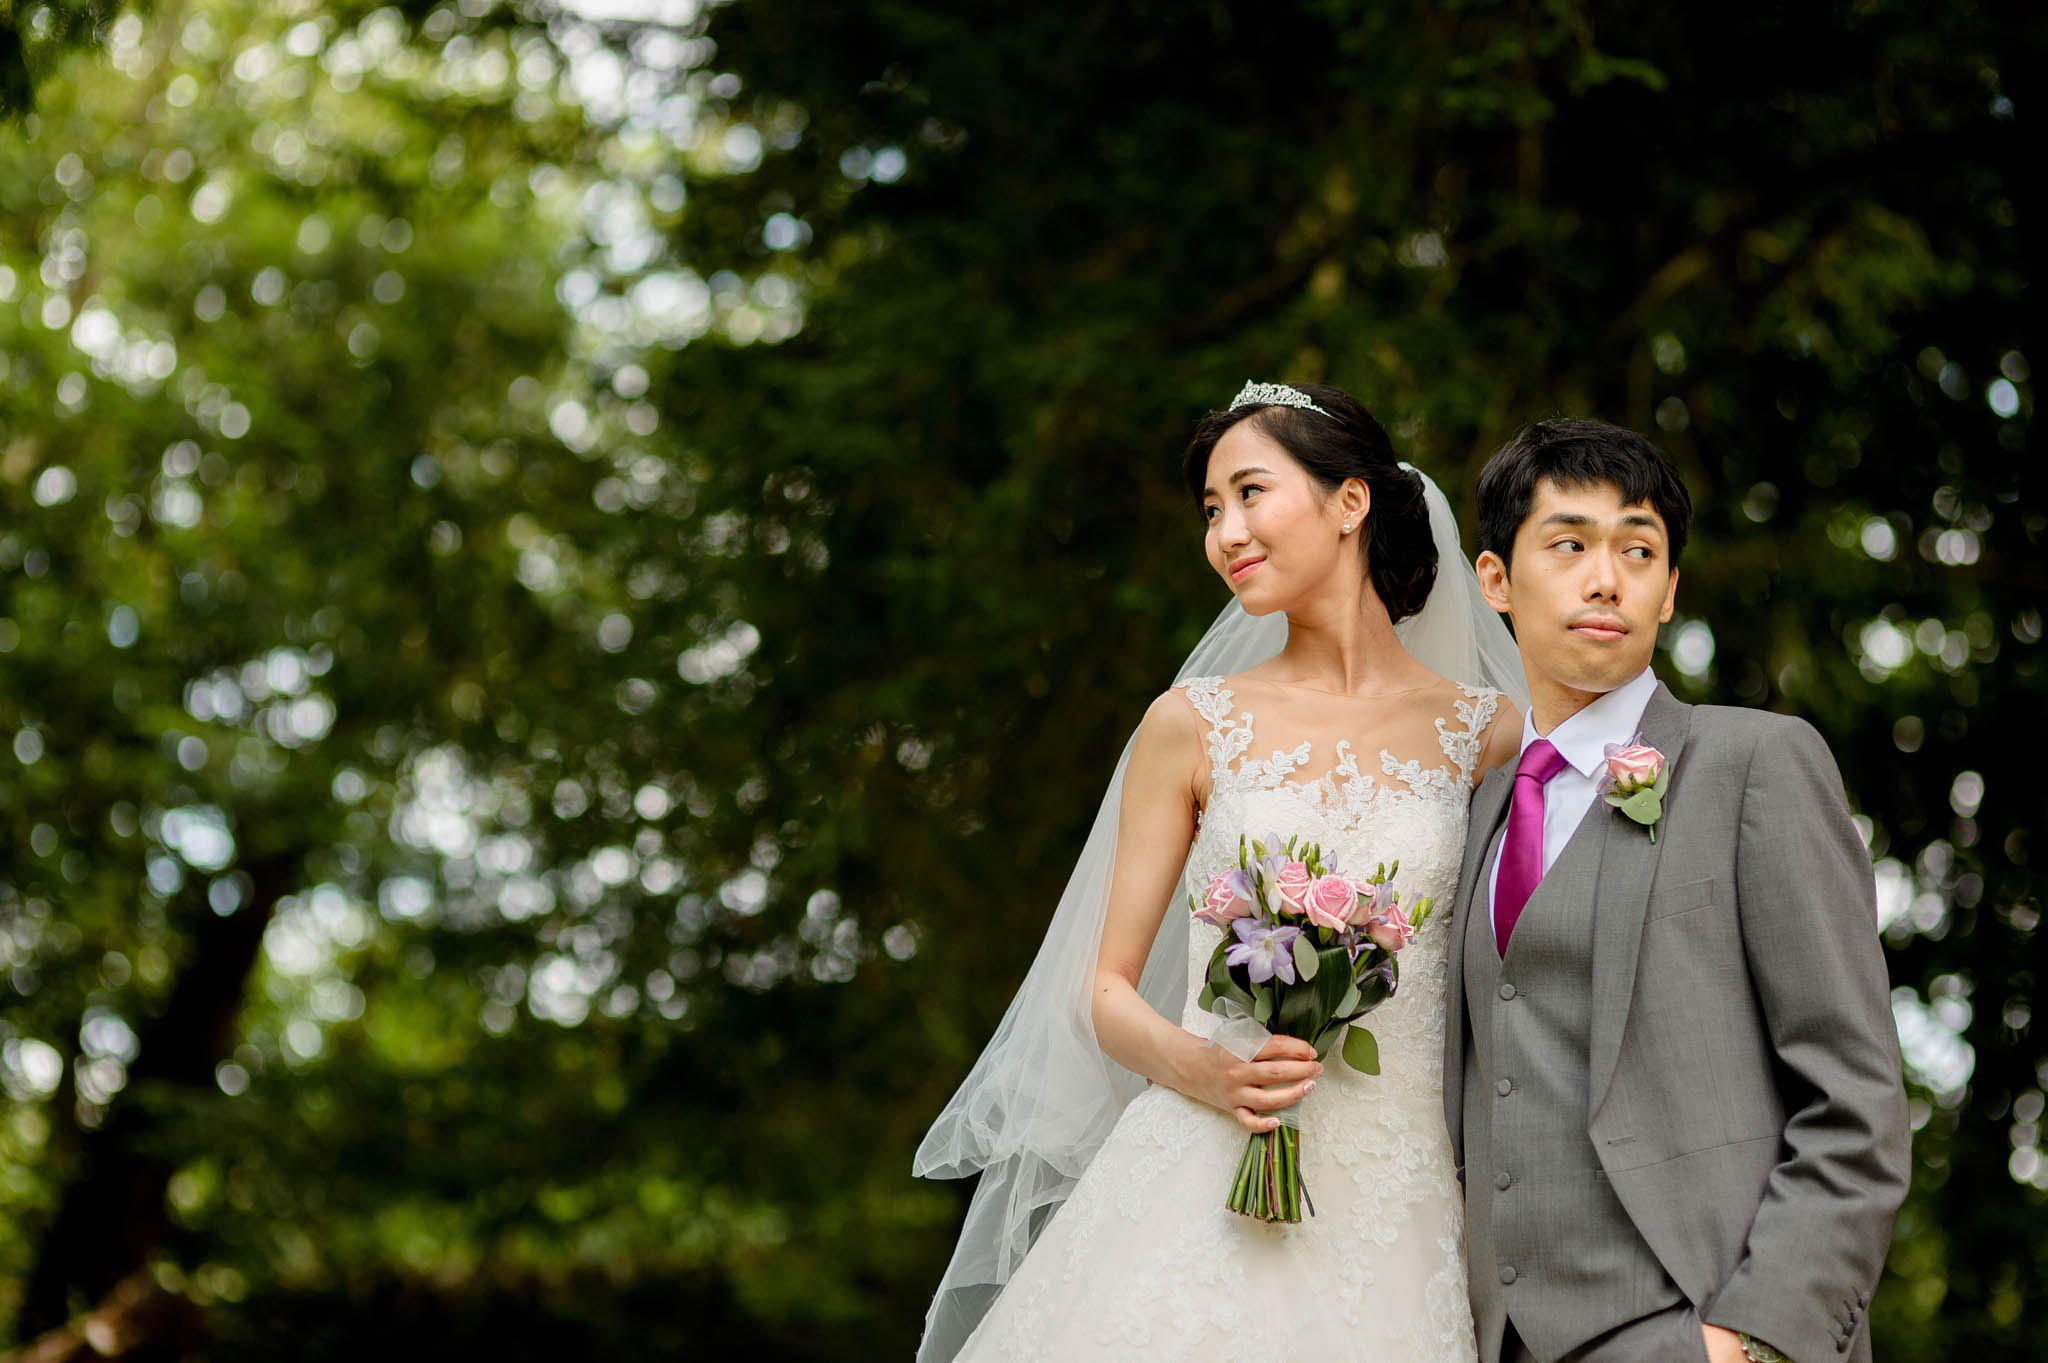 Chinese wedding at Eastnor Castle in Herefordshire, West Midlands - Yilin & Tongbiao 4